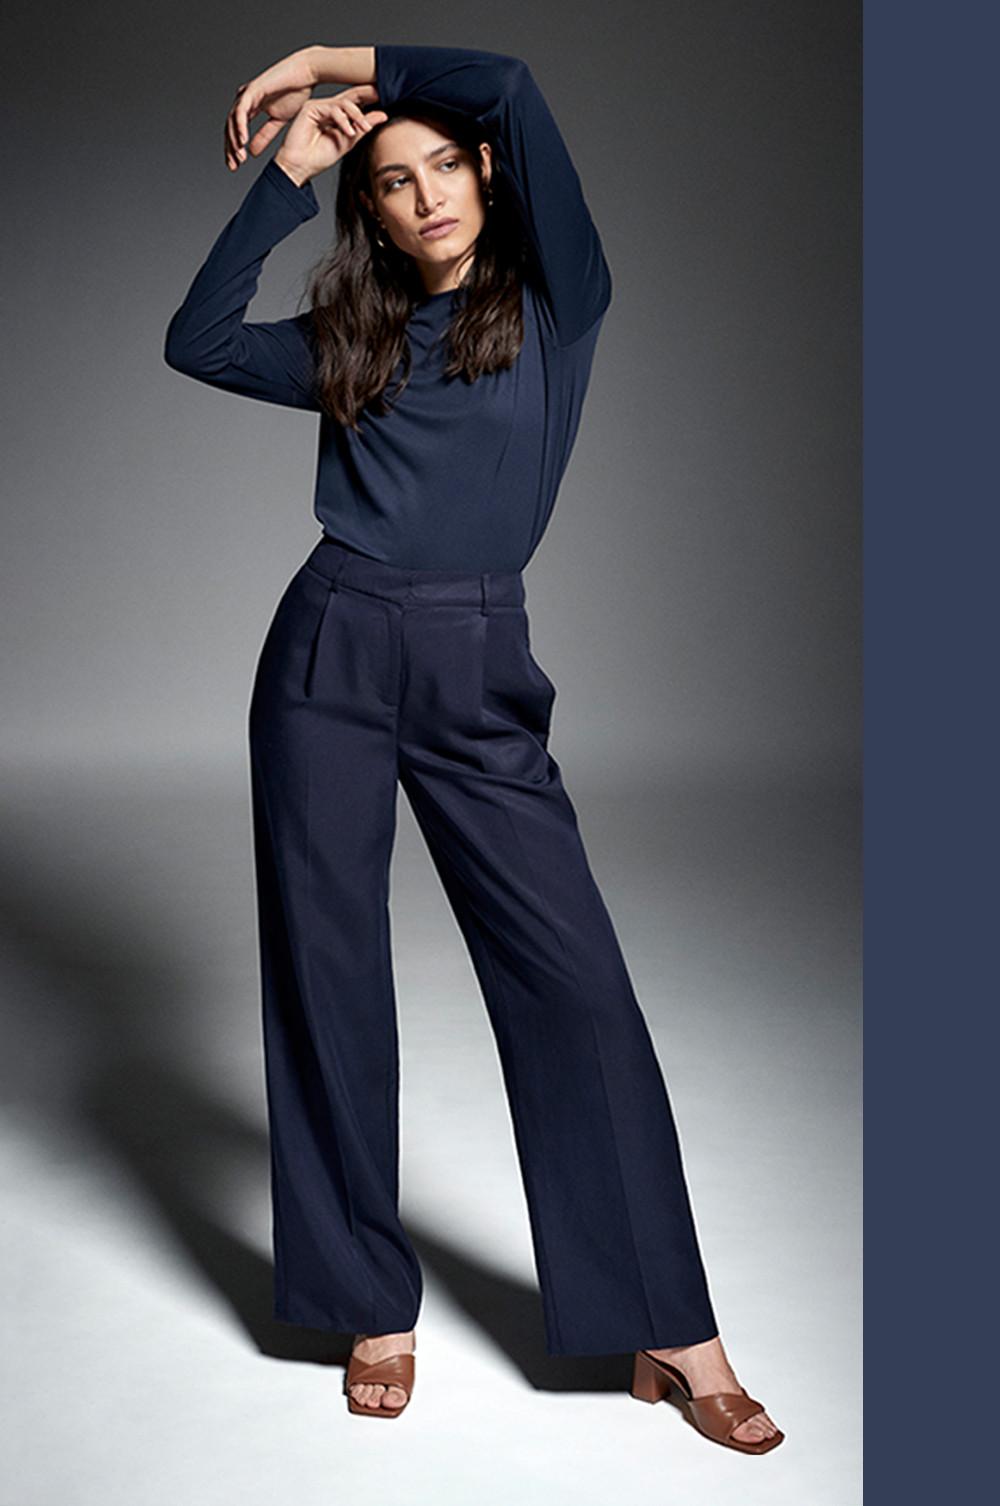 Model wears Navy wide leg trousers, with coordinating soft touch navy top